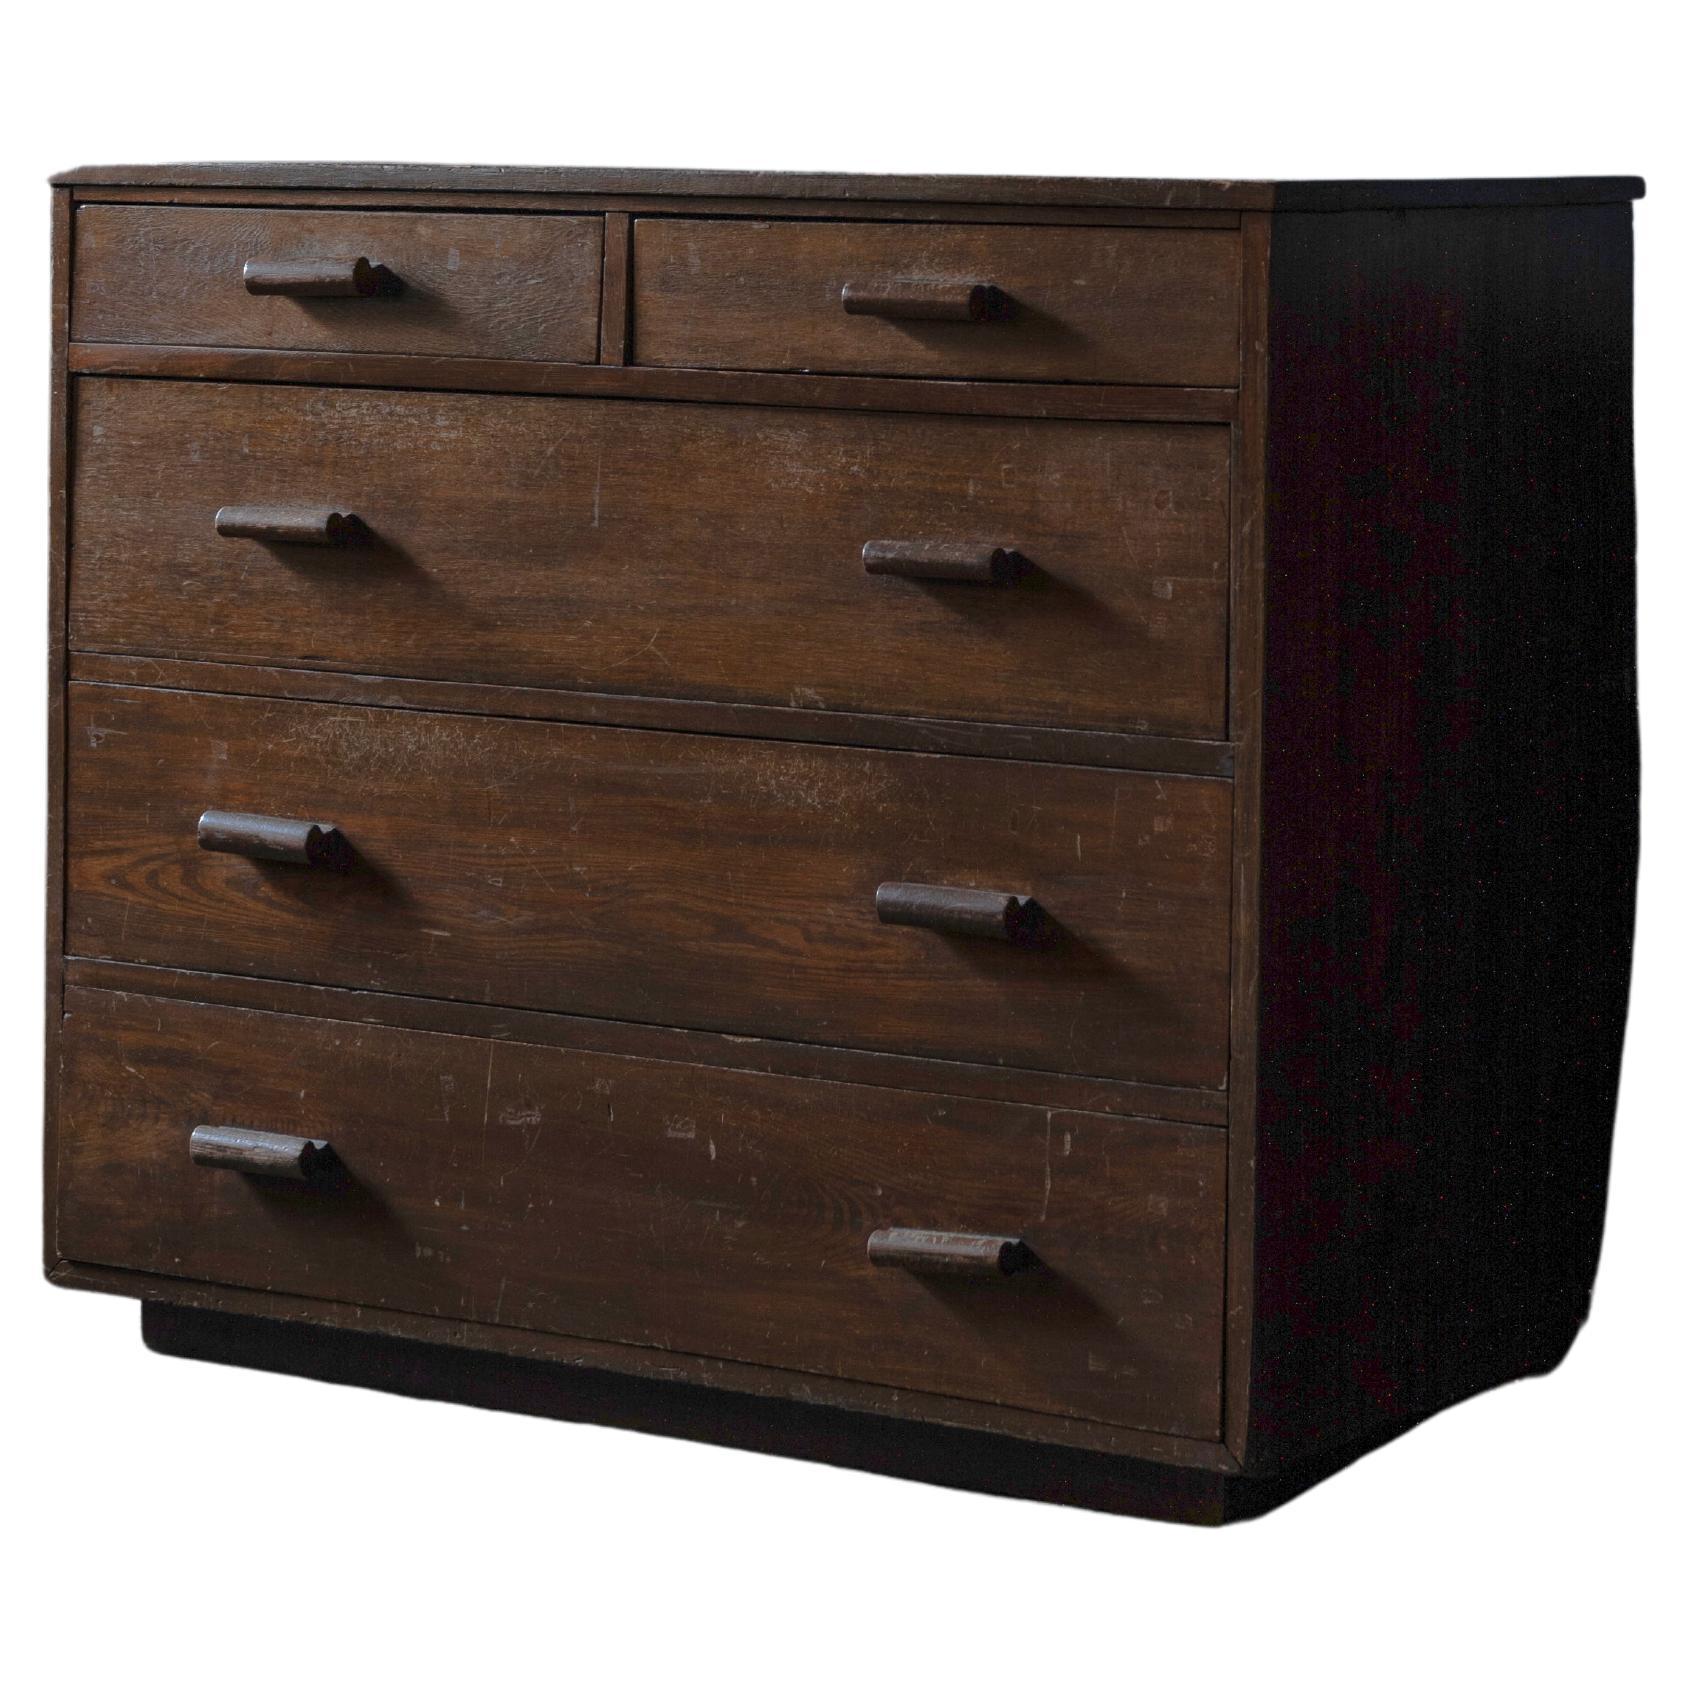 Japanese Modernism Chest by IARI , a For Sale